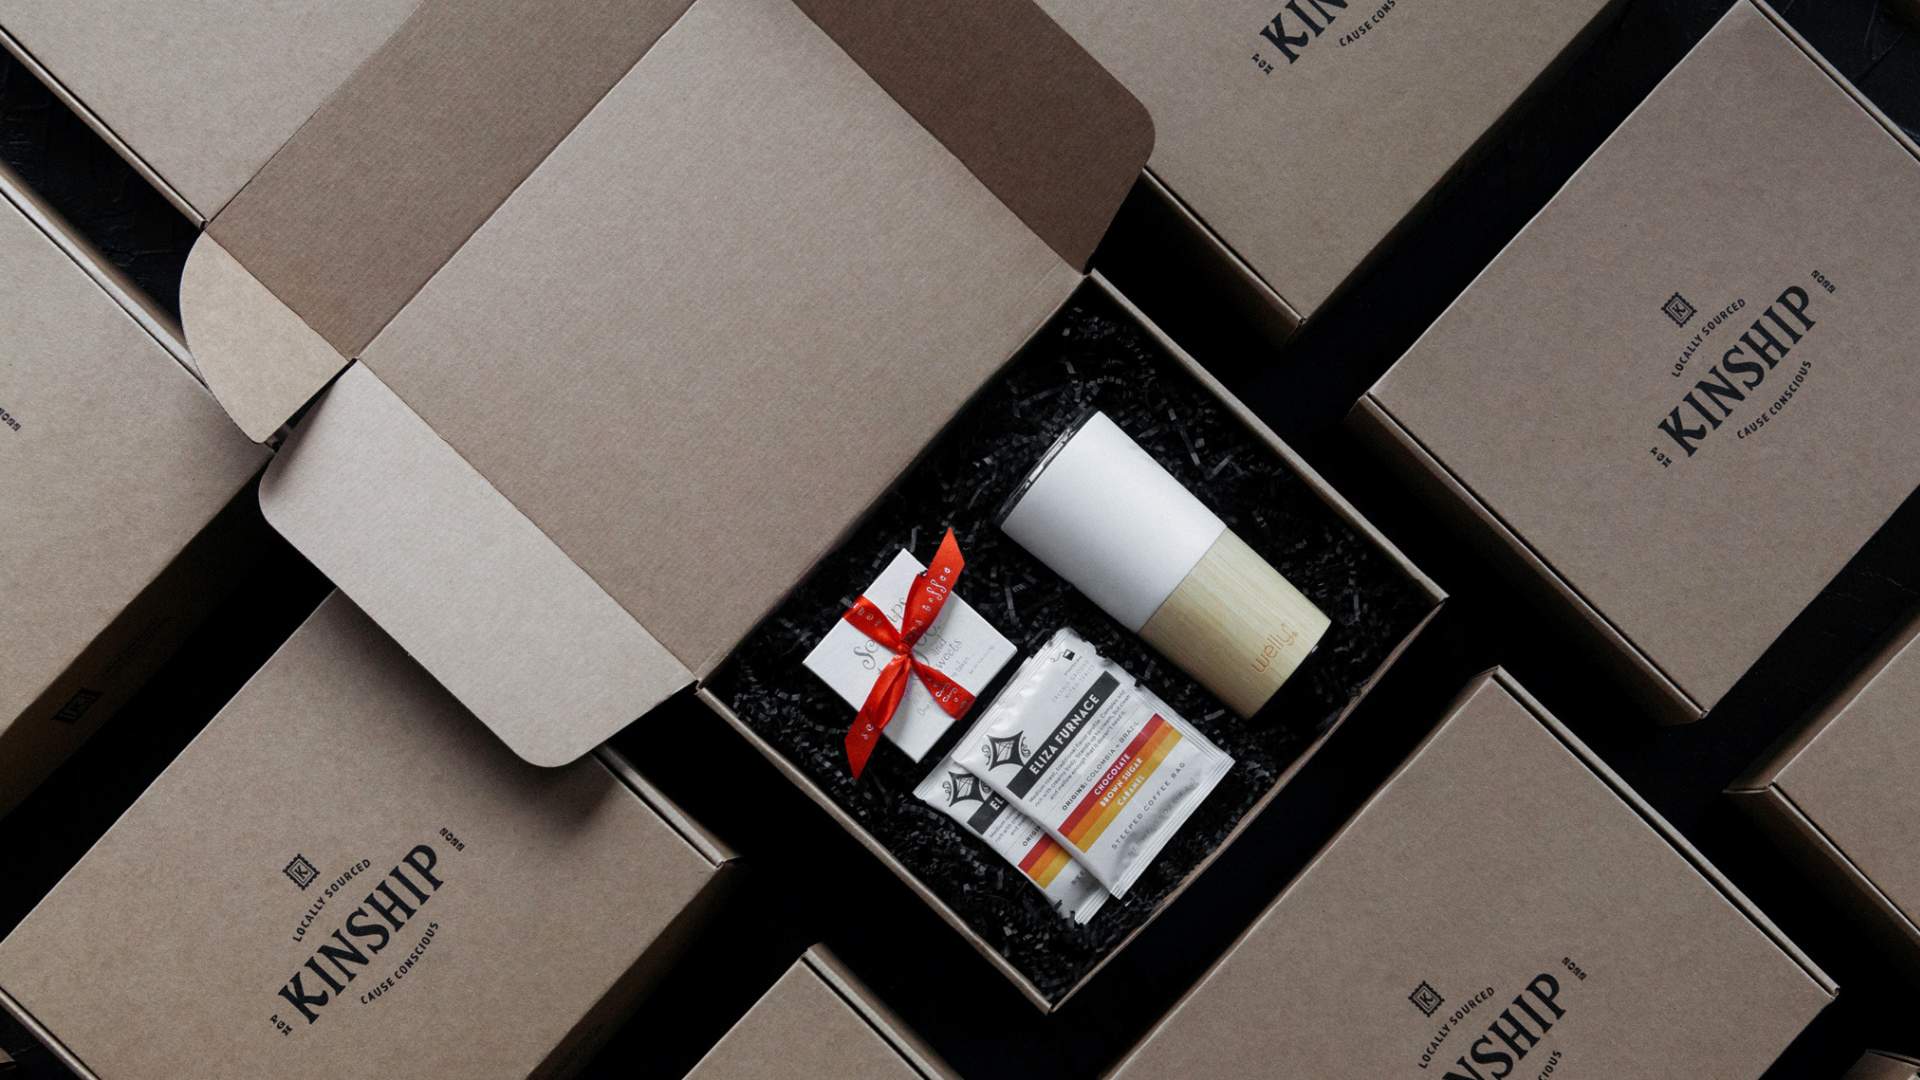 Kinship corporate gifts flatlay with closed custom packaging and one open box with Welly, De Fer Coffee, and Sacamps toffee in classic corporate gift